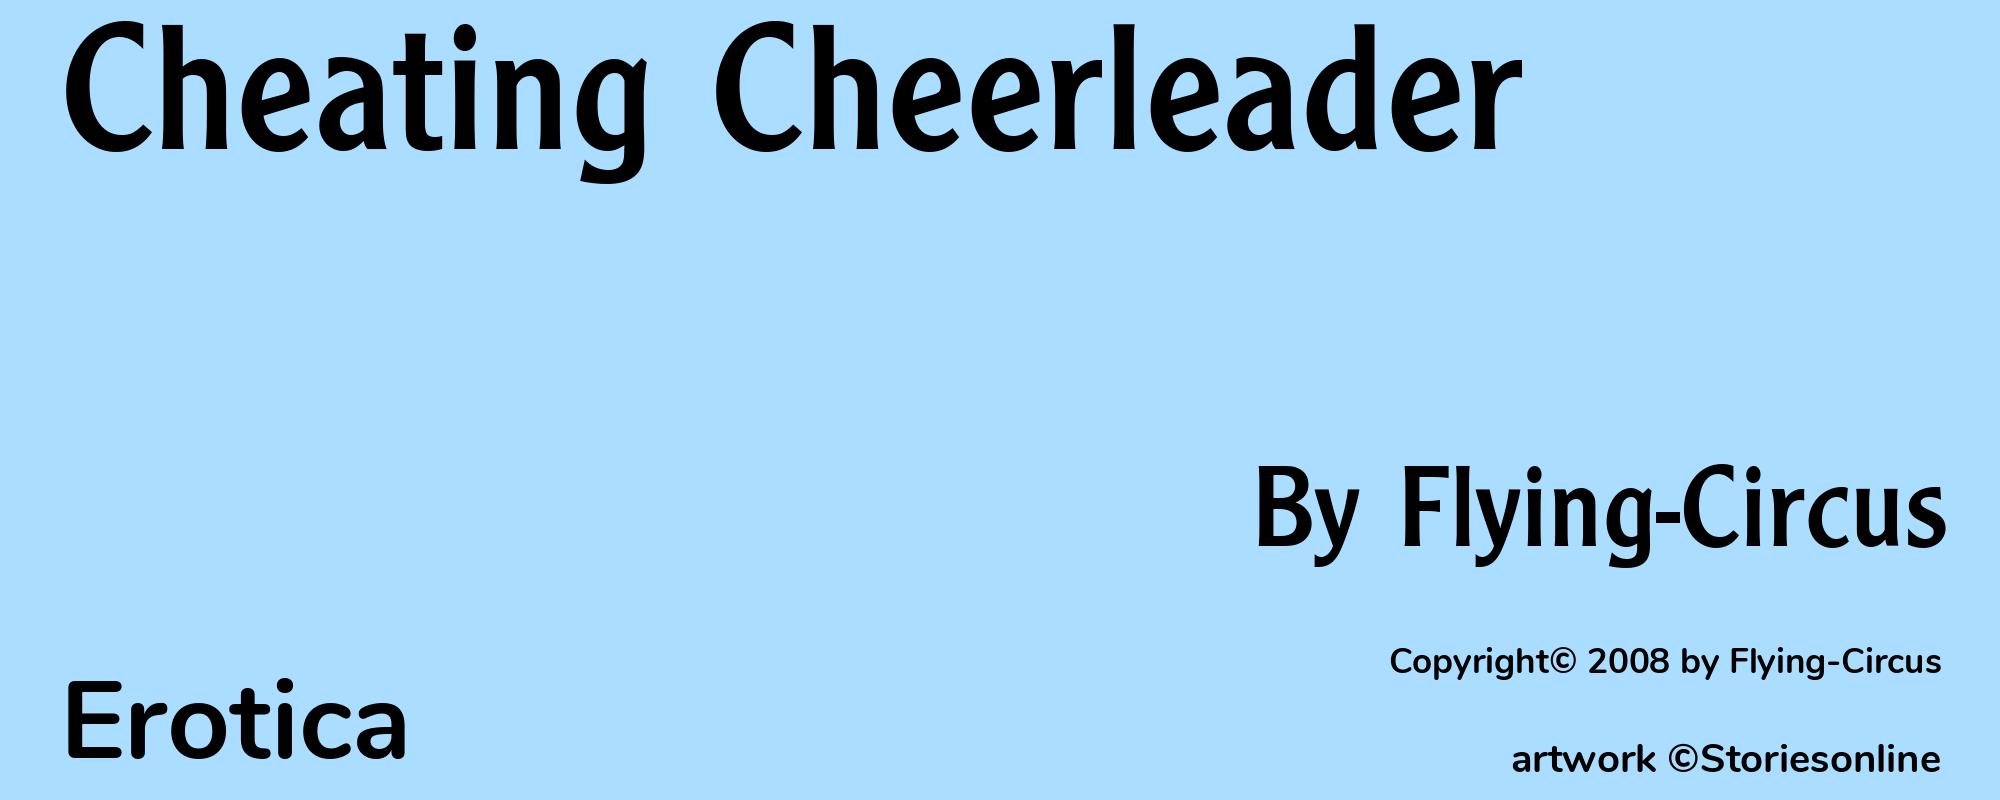 Cheating Cheerleader - Cover